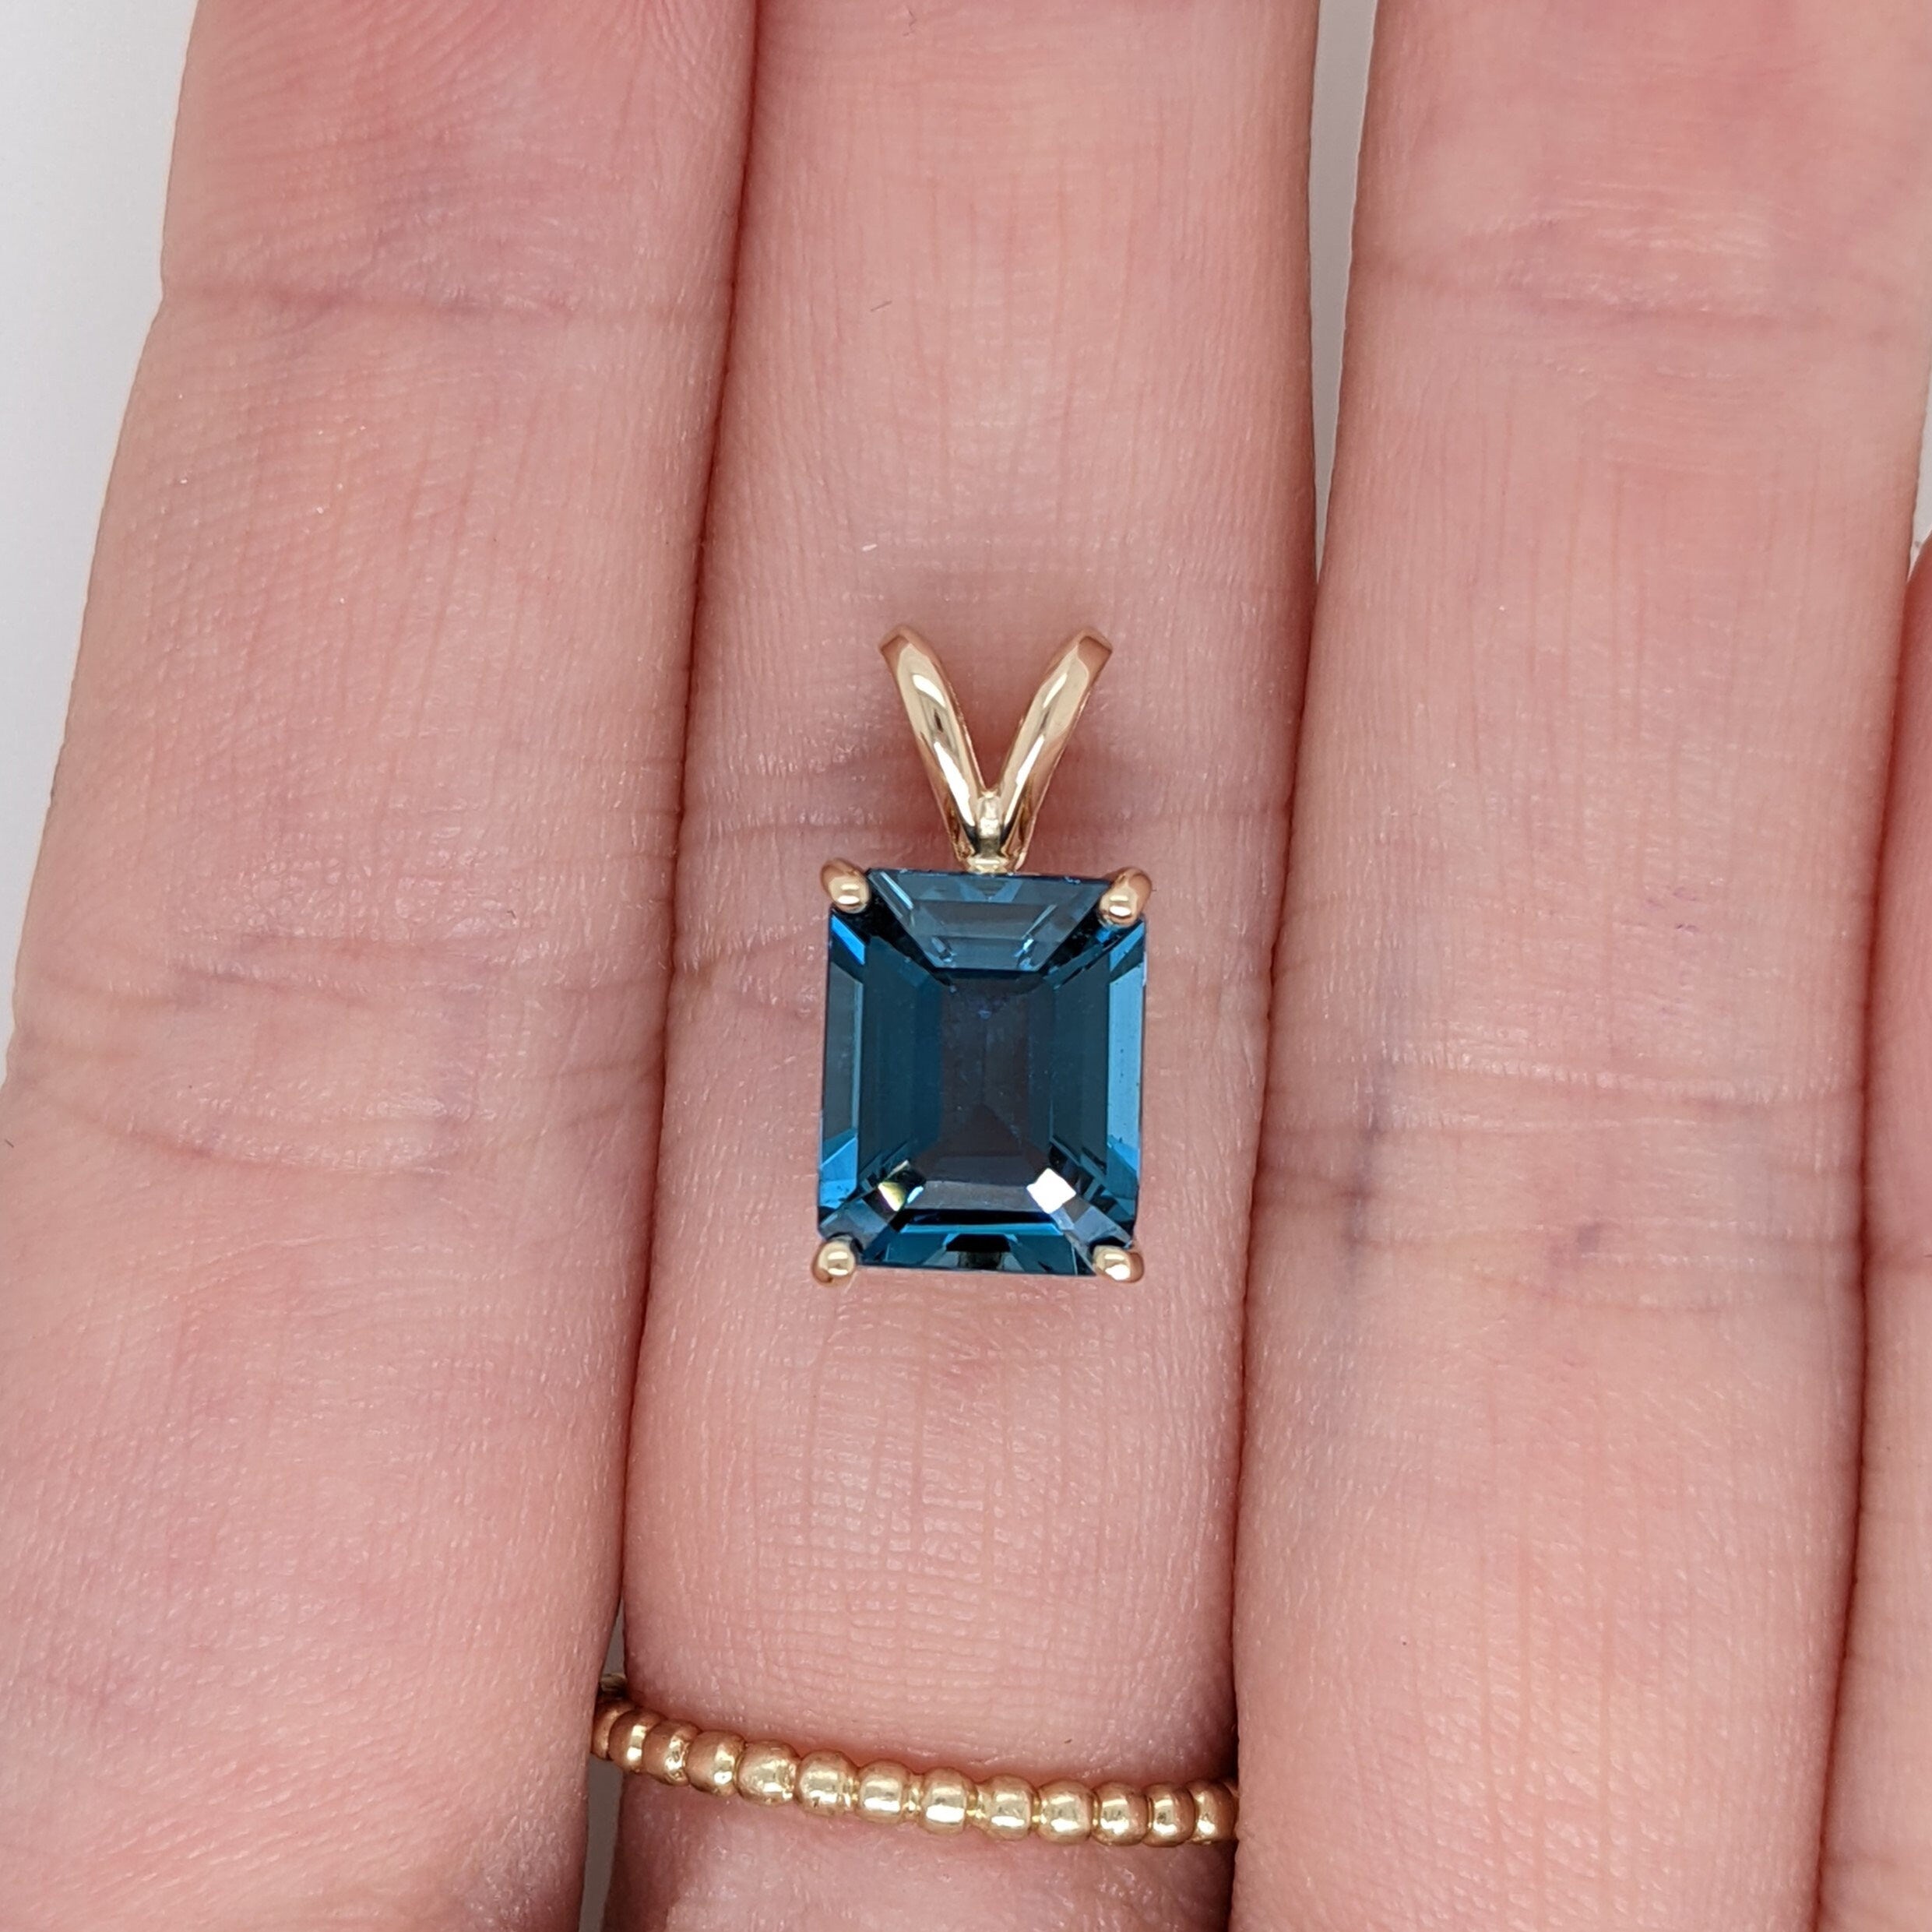 Solitaire London Blue Topaz Pendant in Solid 14k White, Yellow or Rose Gold | Emerald Cut 10x8mm | Rabbit Bail | Blue Gemstone | November